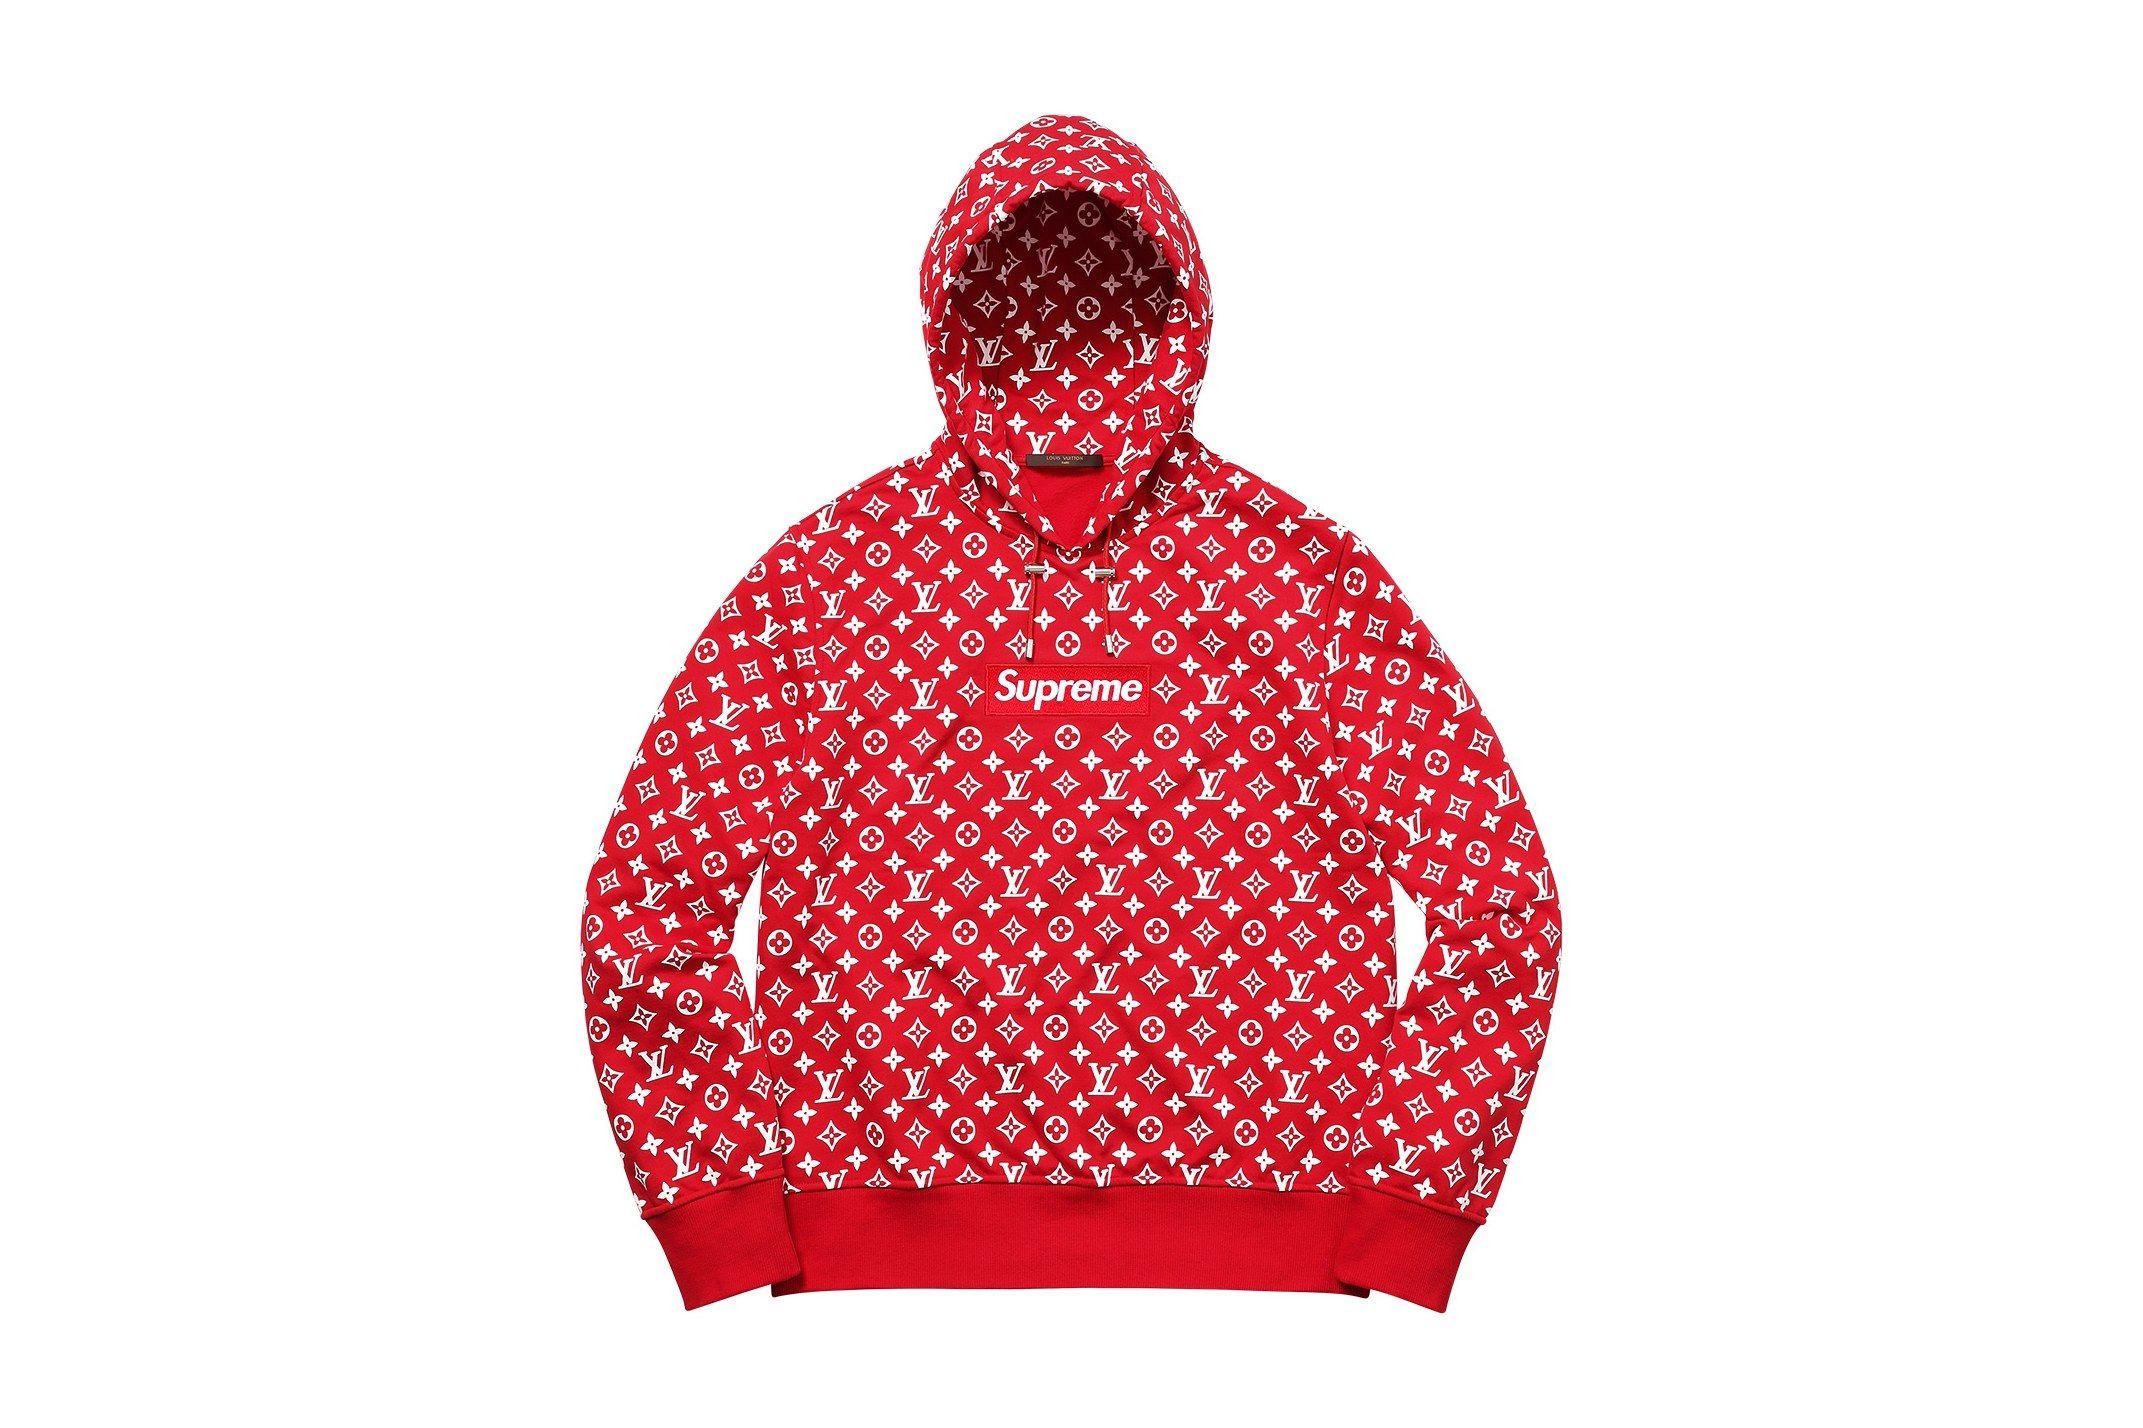 LV X Supreme Collab Logo - Supreme X Louis Vuitton: See Every Piece From The Game Changing